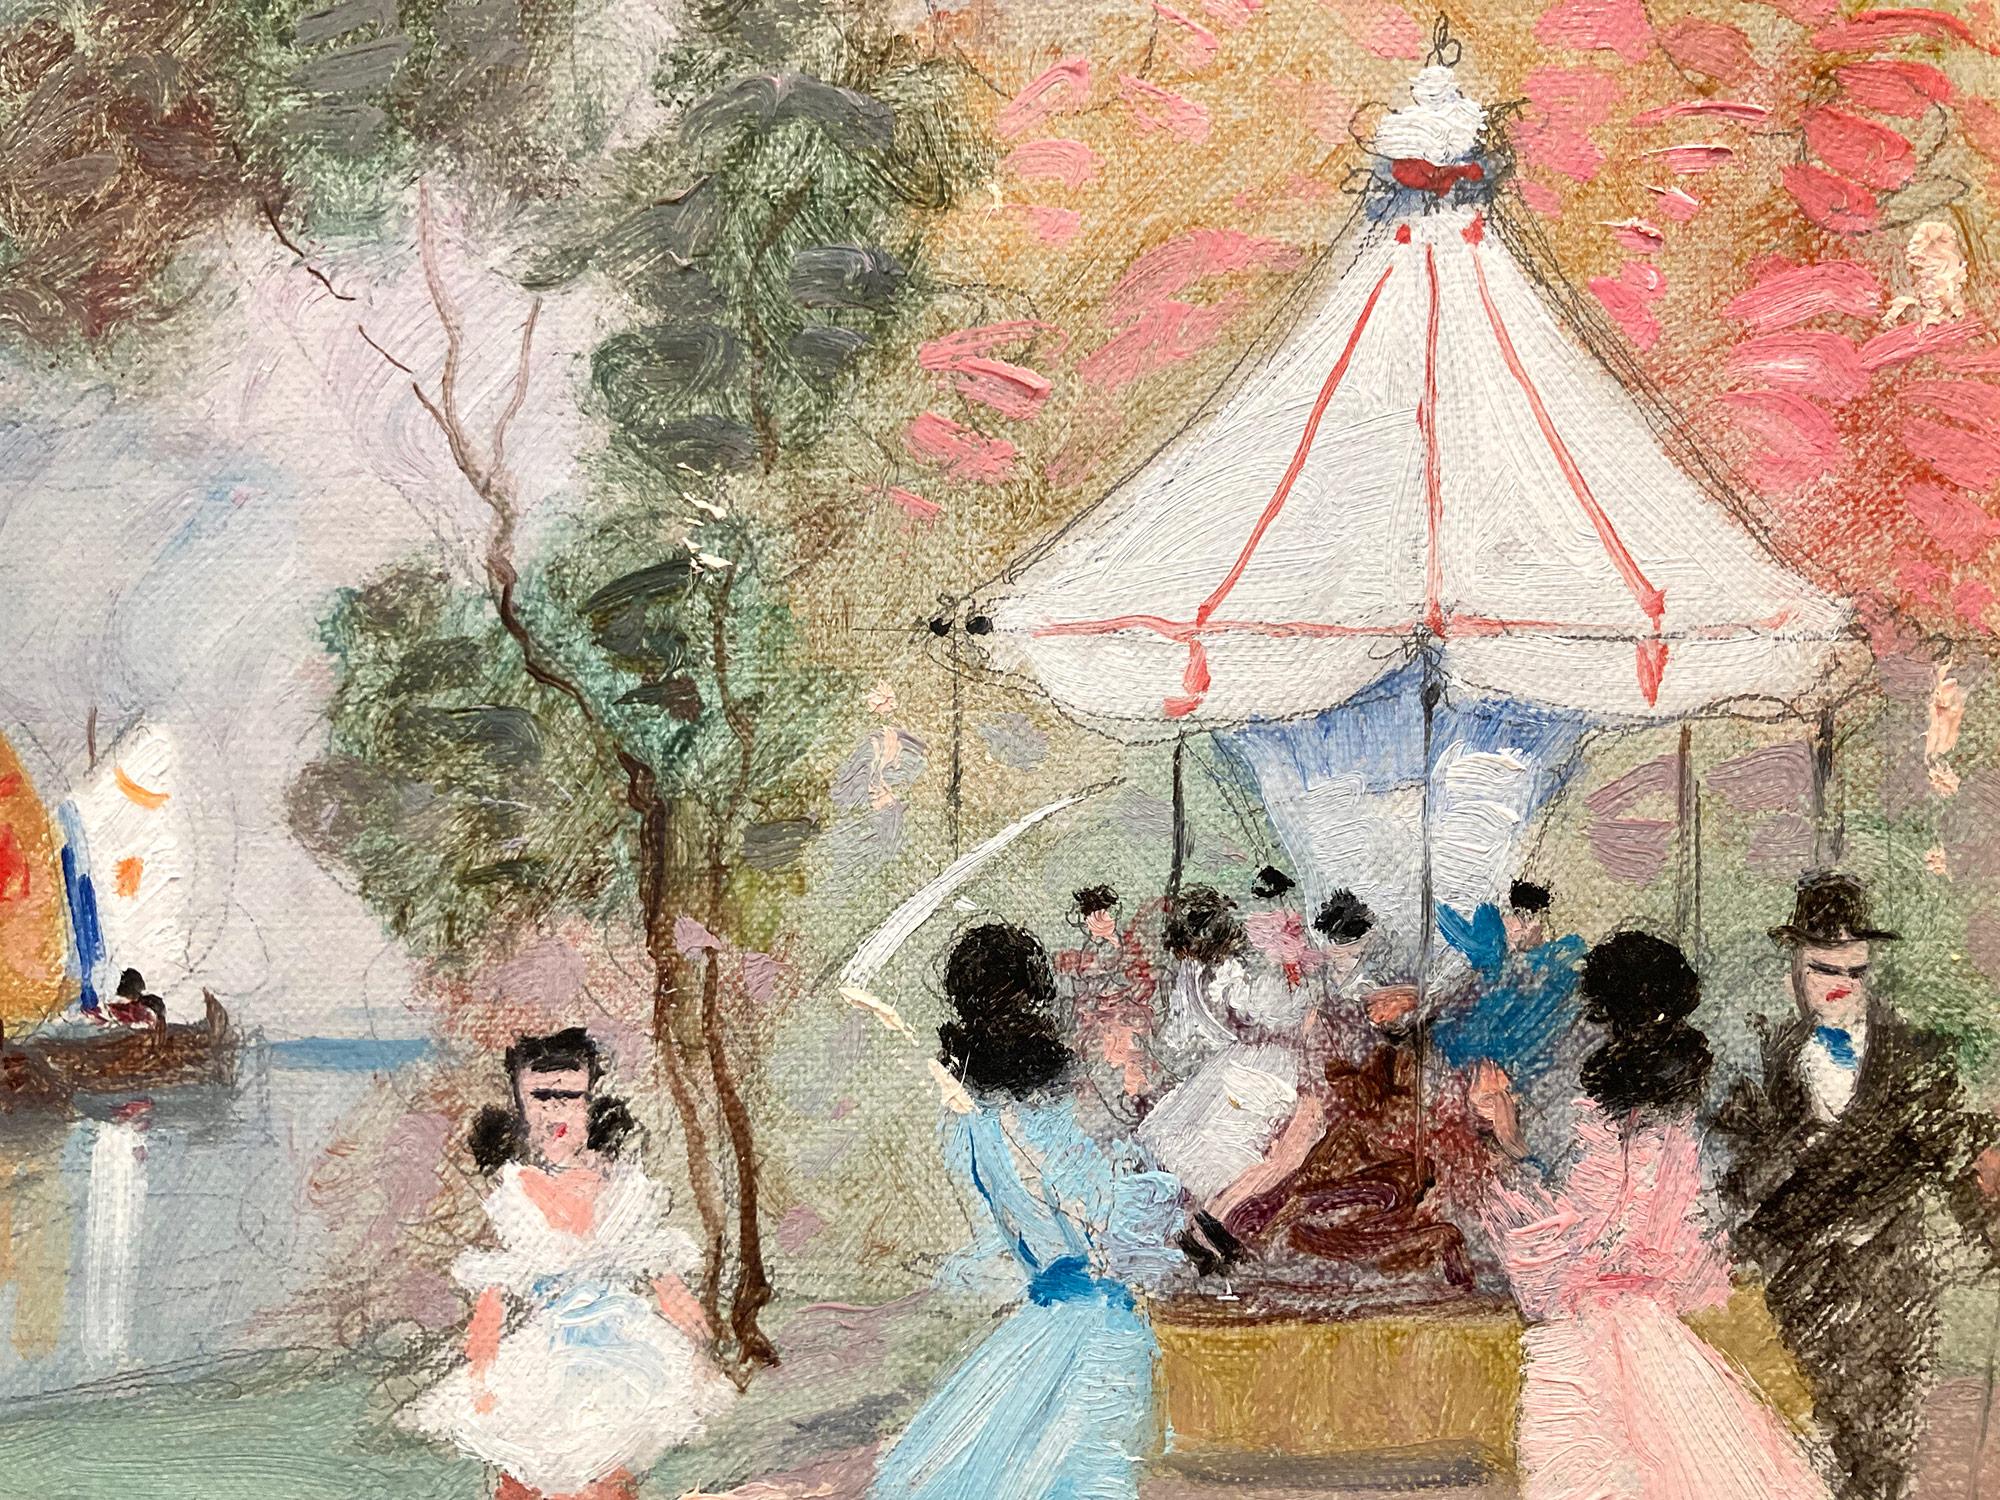 A whimsical oil painting depicting a carnival scene in Paris, France by Luigi Cagliani. As an Italian Impressionist artist Cagliani most of his works were produced in the first half of the 20th Century, he was known for his charming compositions. He